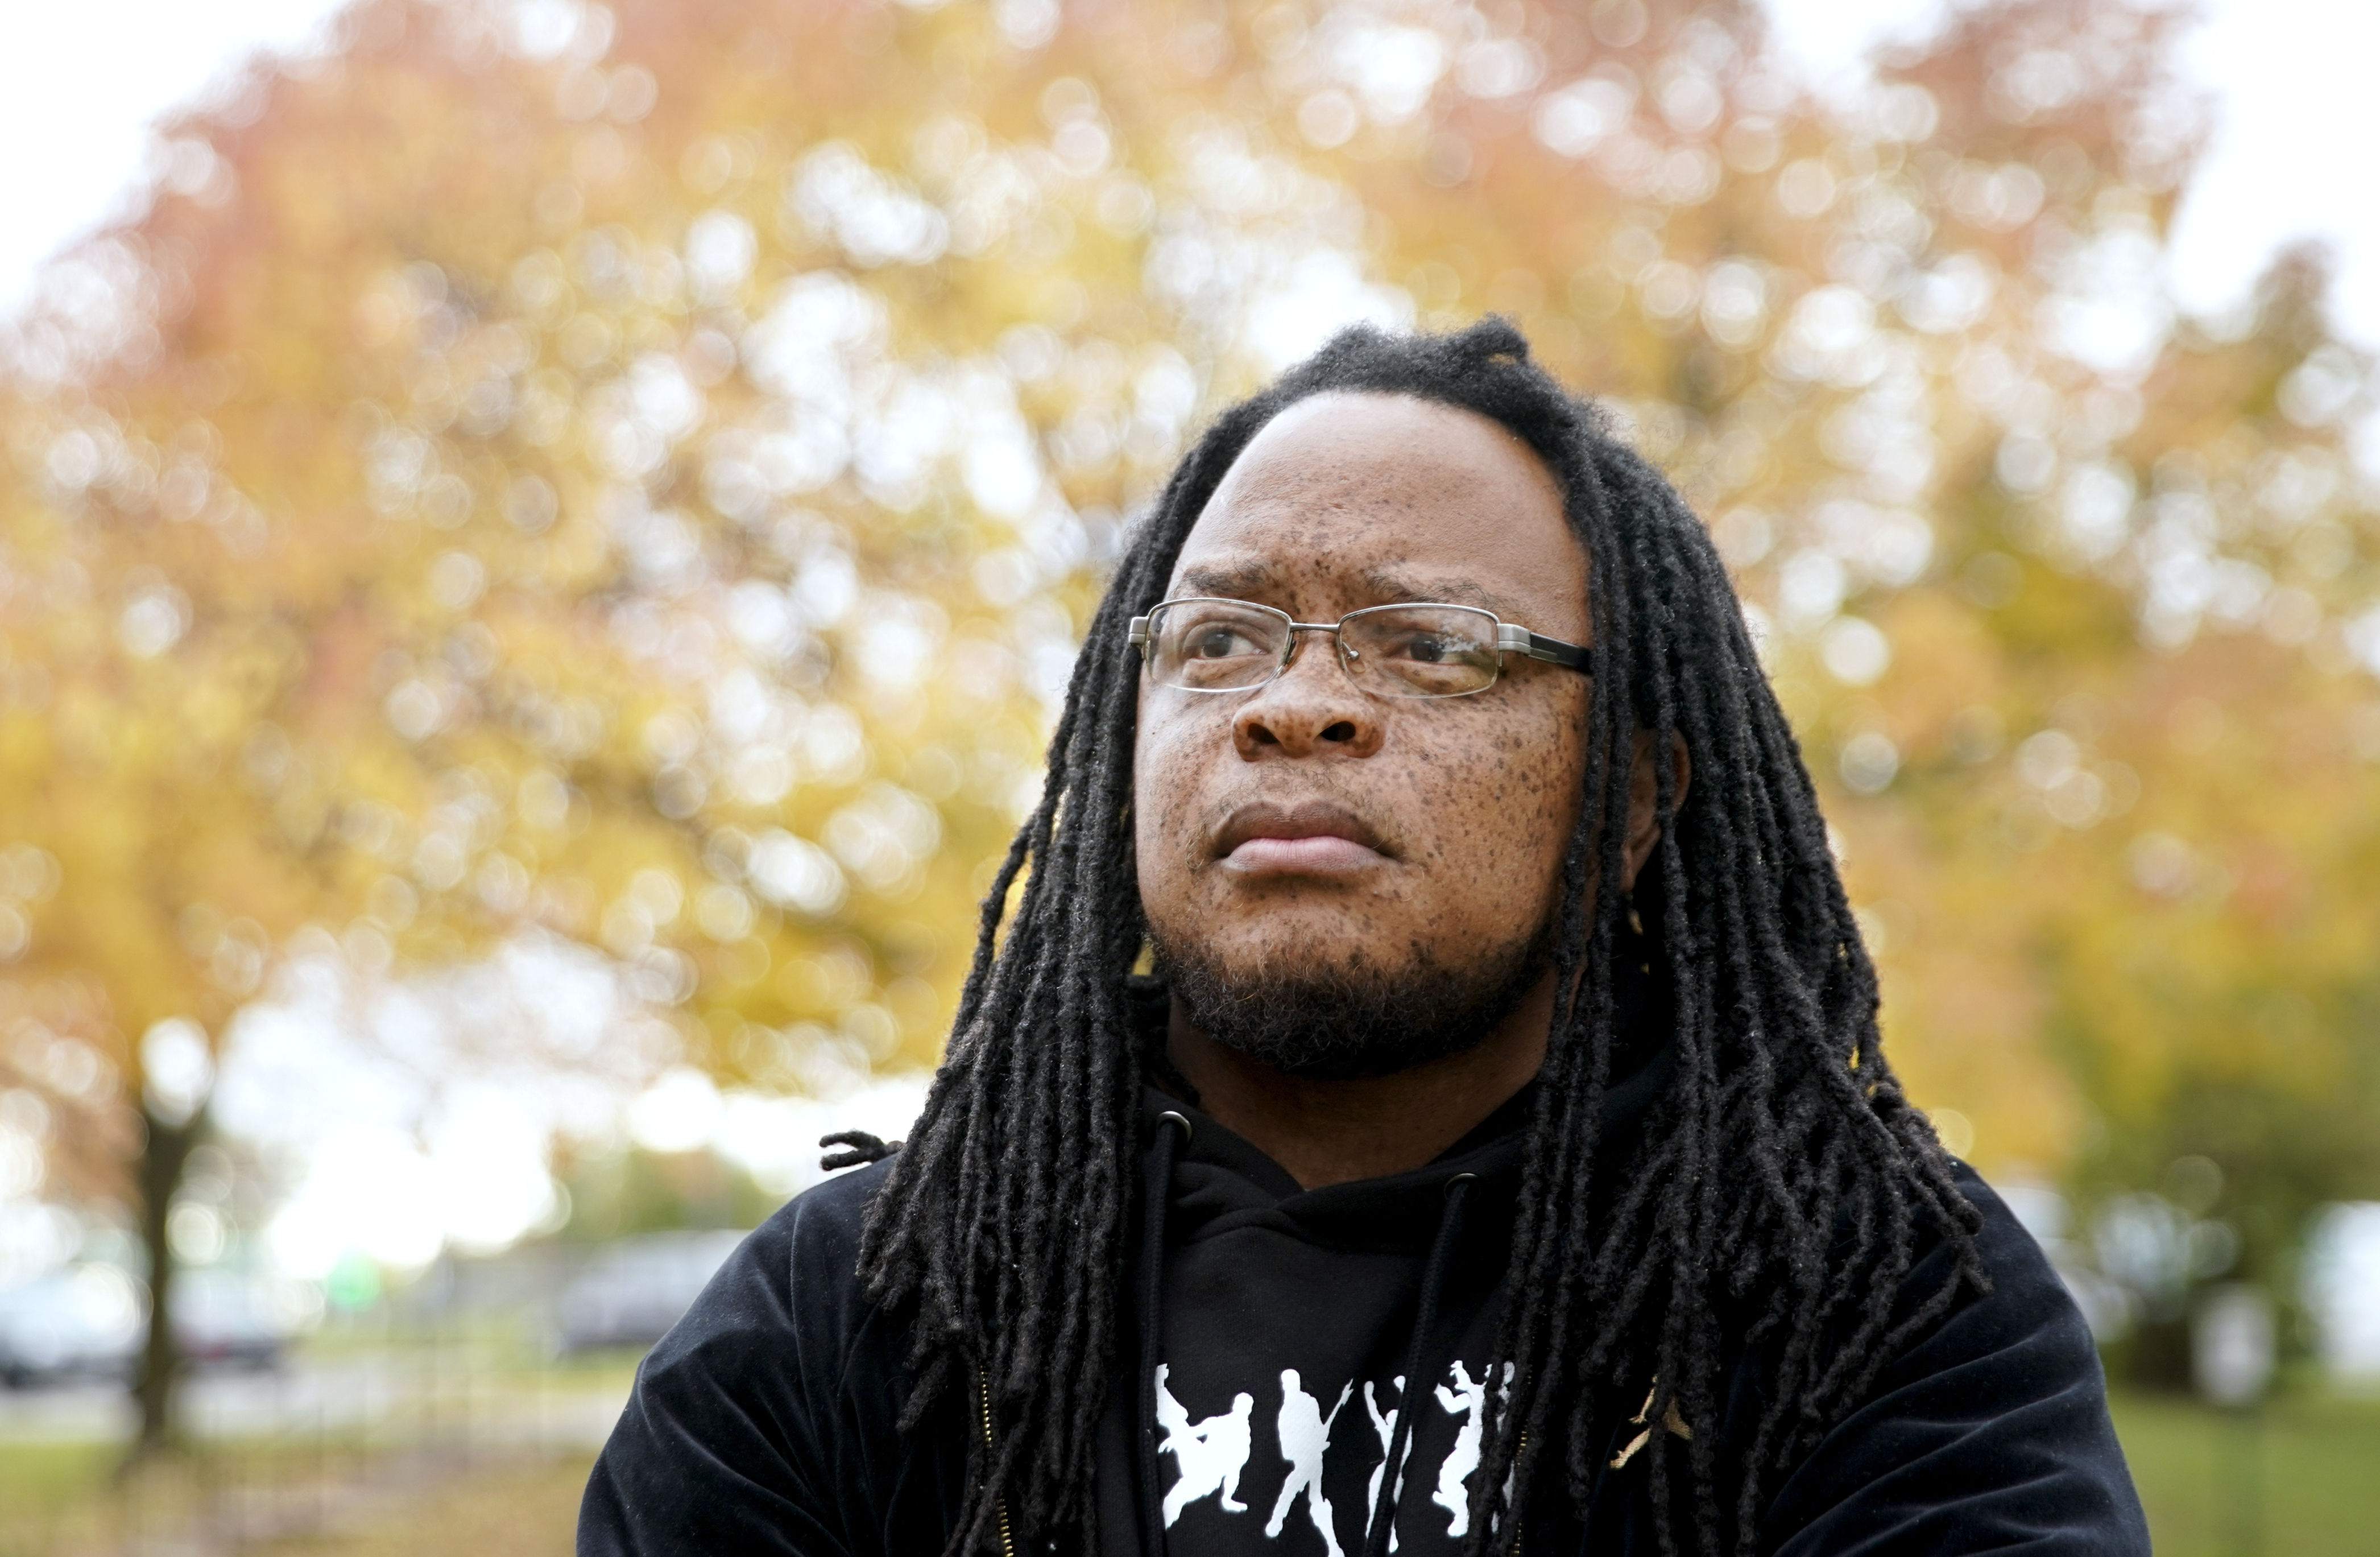 FILE - In this Oct. 17, 2019, file photo, Marlon Anderson poses for a photo in Madison, Wis. A Wisconsin school district is rehiring Anderson, a security guard after he was fired last week for repeating a racial slur while telling a student not to use it, a union official said Monday, Oct. 21. (Steve Apps/Wisconsin State Journal via AP) (Steve Apps&mdash;AP)